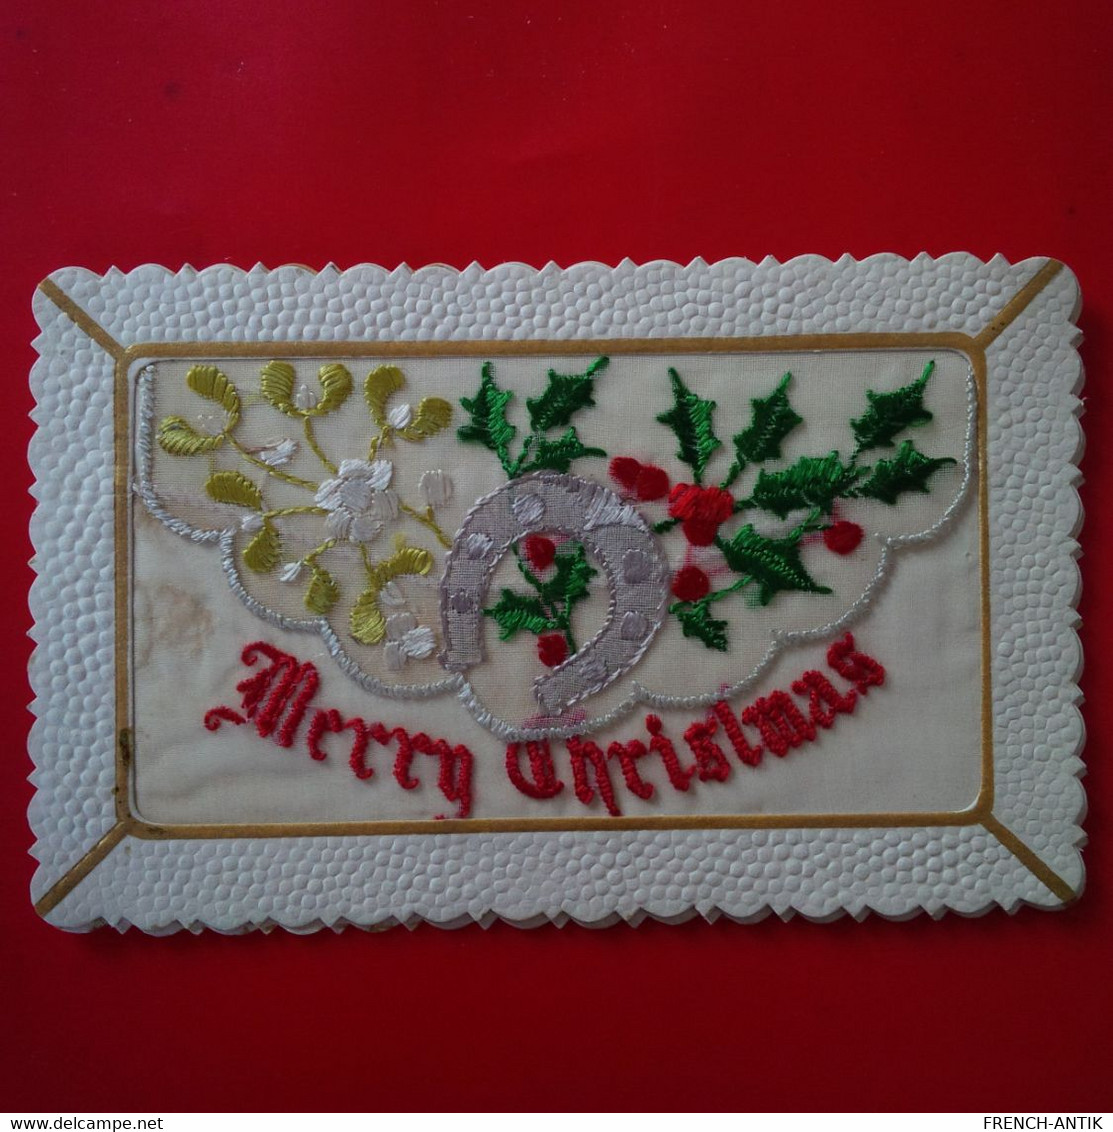 BRODEE MERRY CHRISTMAS - Embroidered